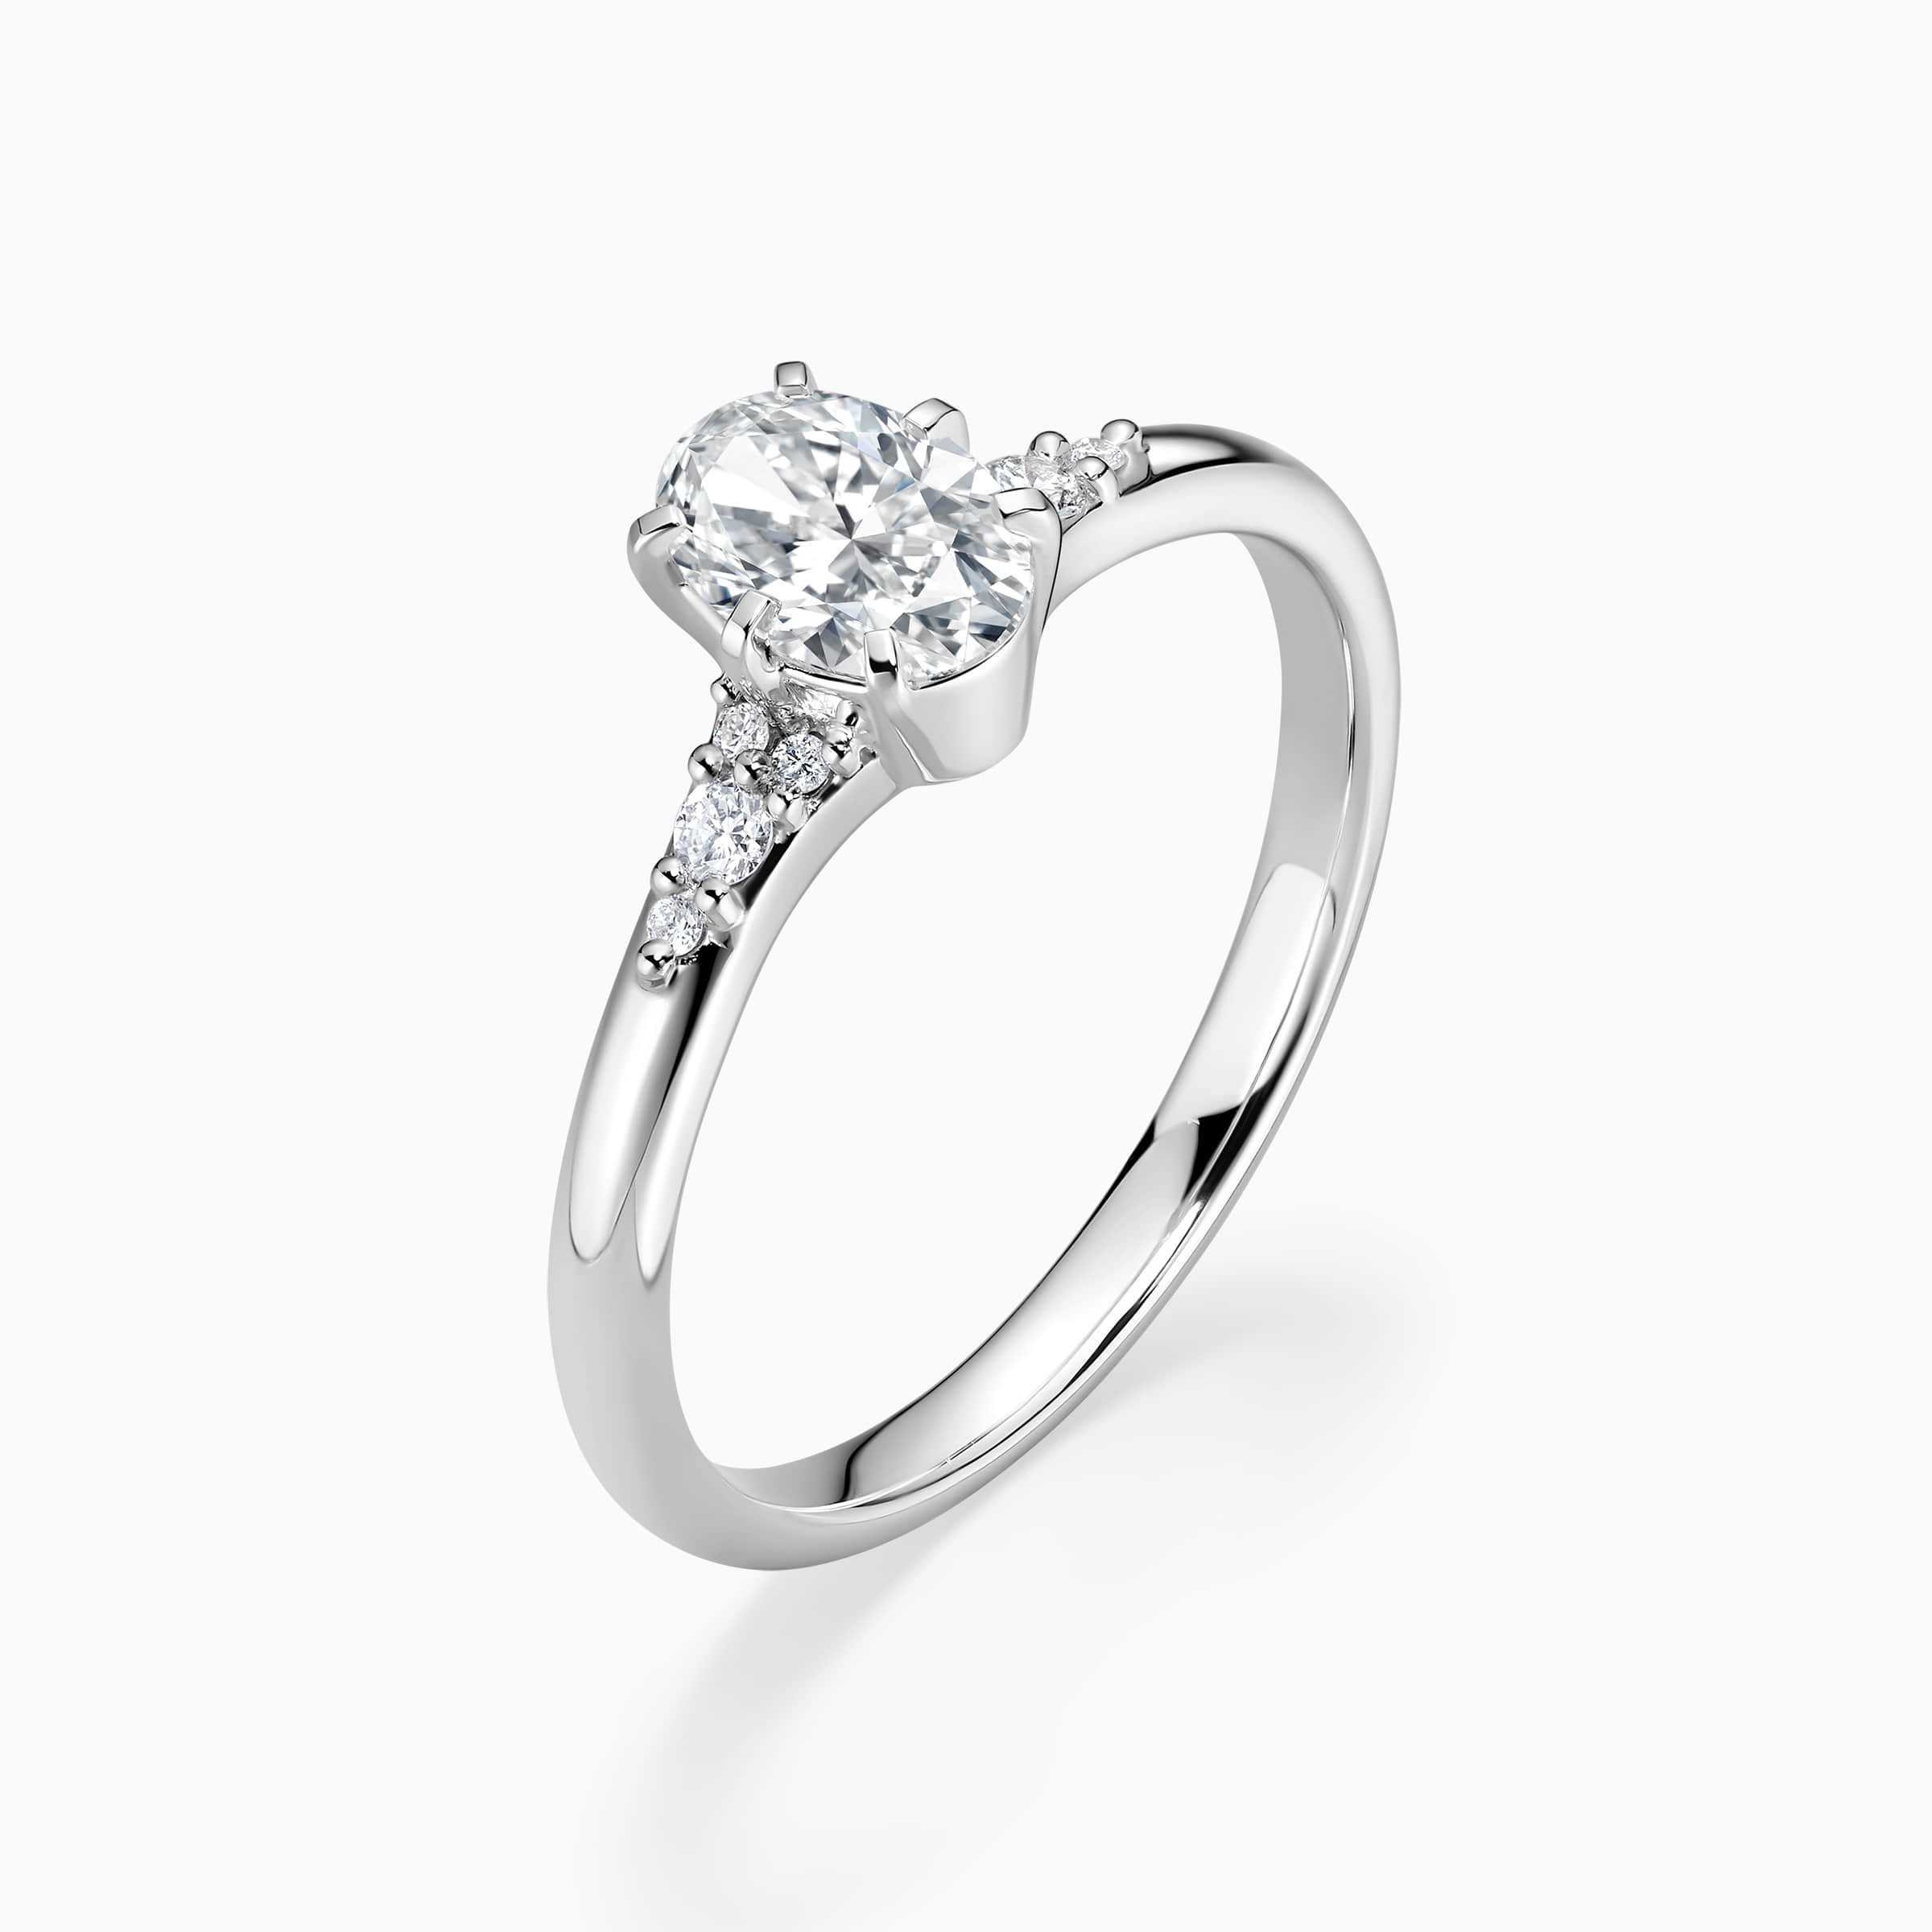 Darry Ring oval engagement ring side view